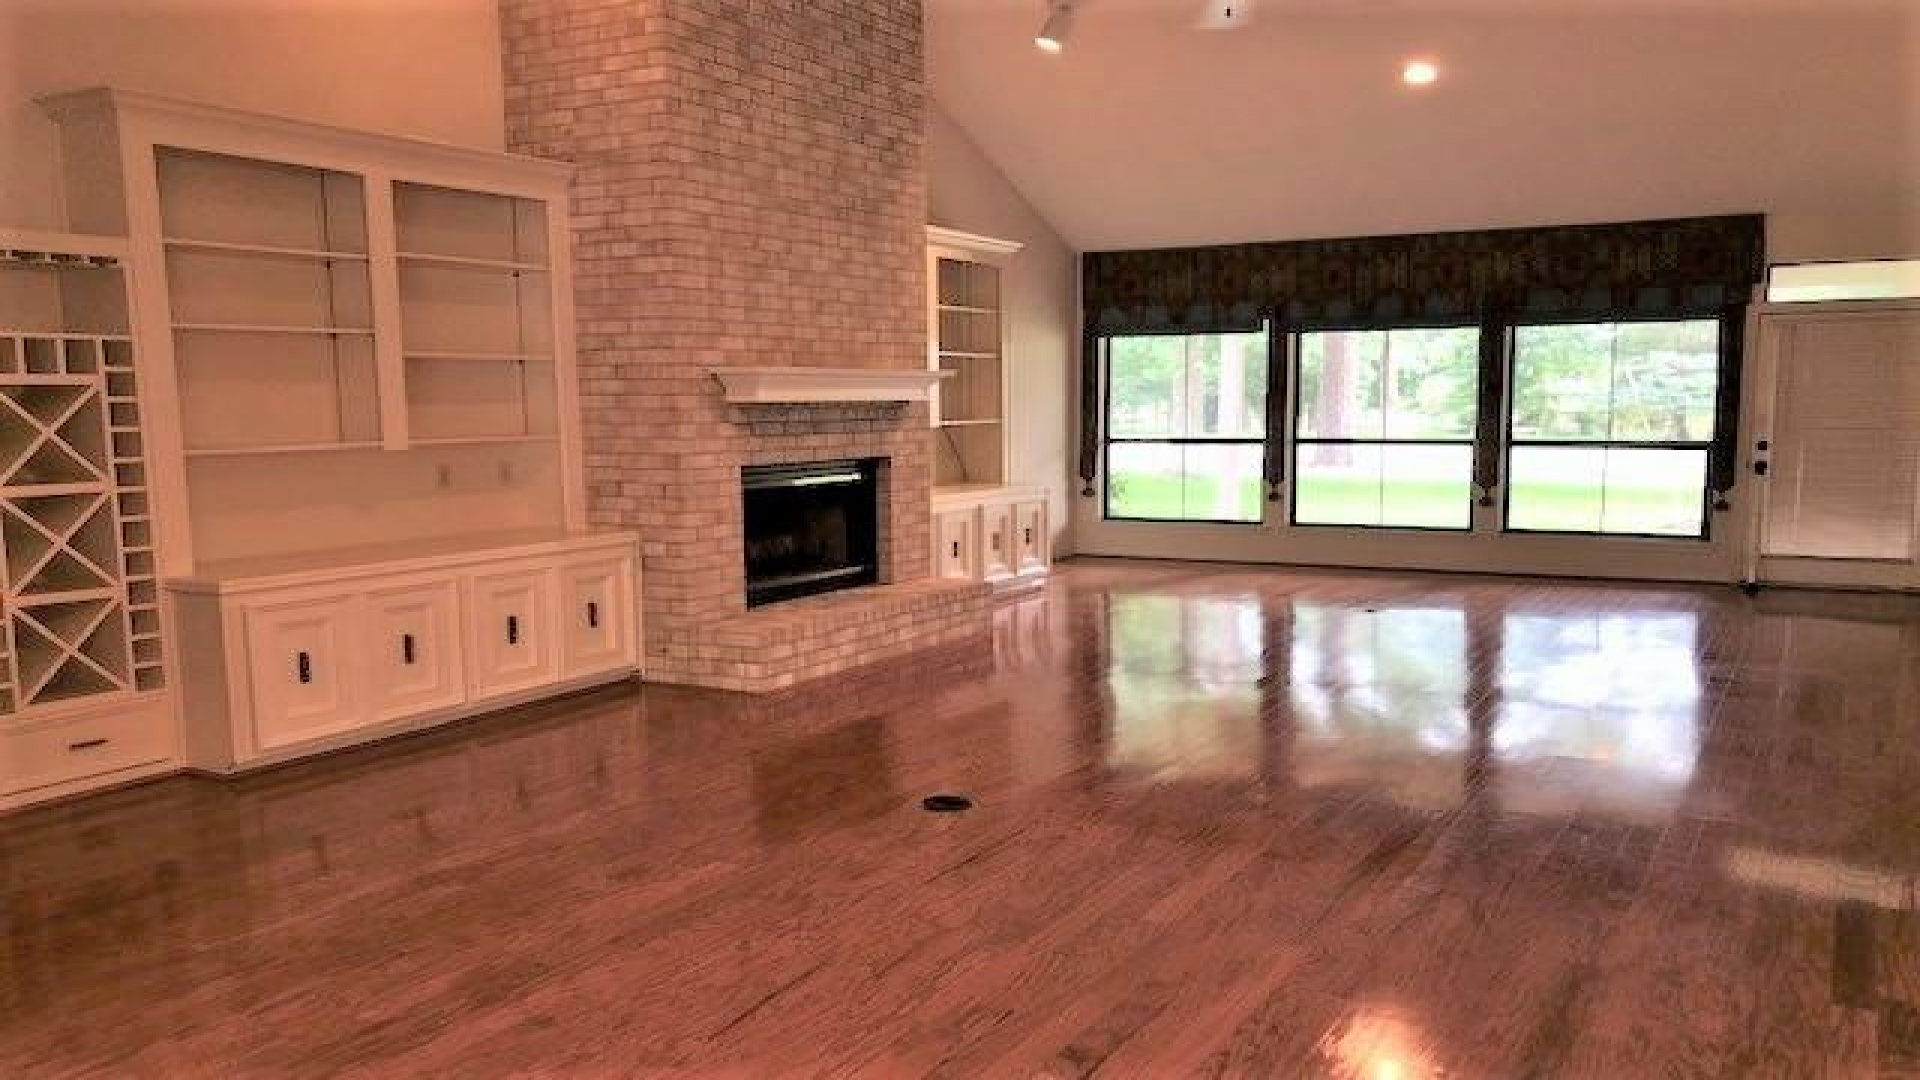 Lake Island Drive 3139, Texas 77356, 3 Bedrooms Bedrooms, ,3 BathroomsBathrooms,Single Family,For Sale,1010